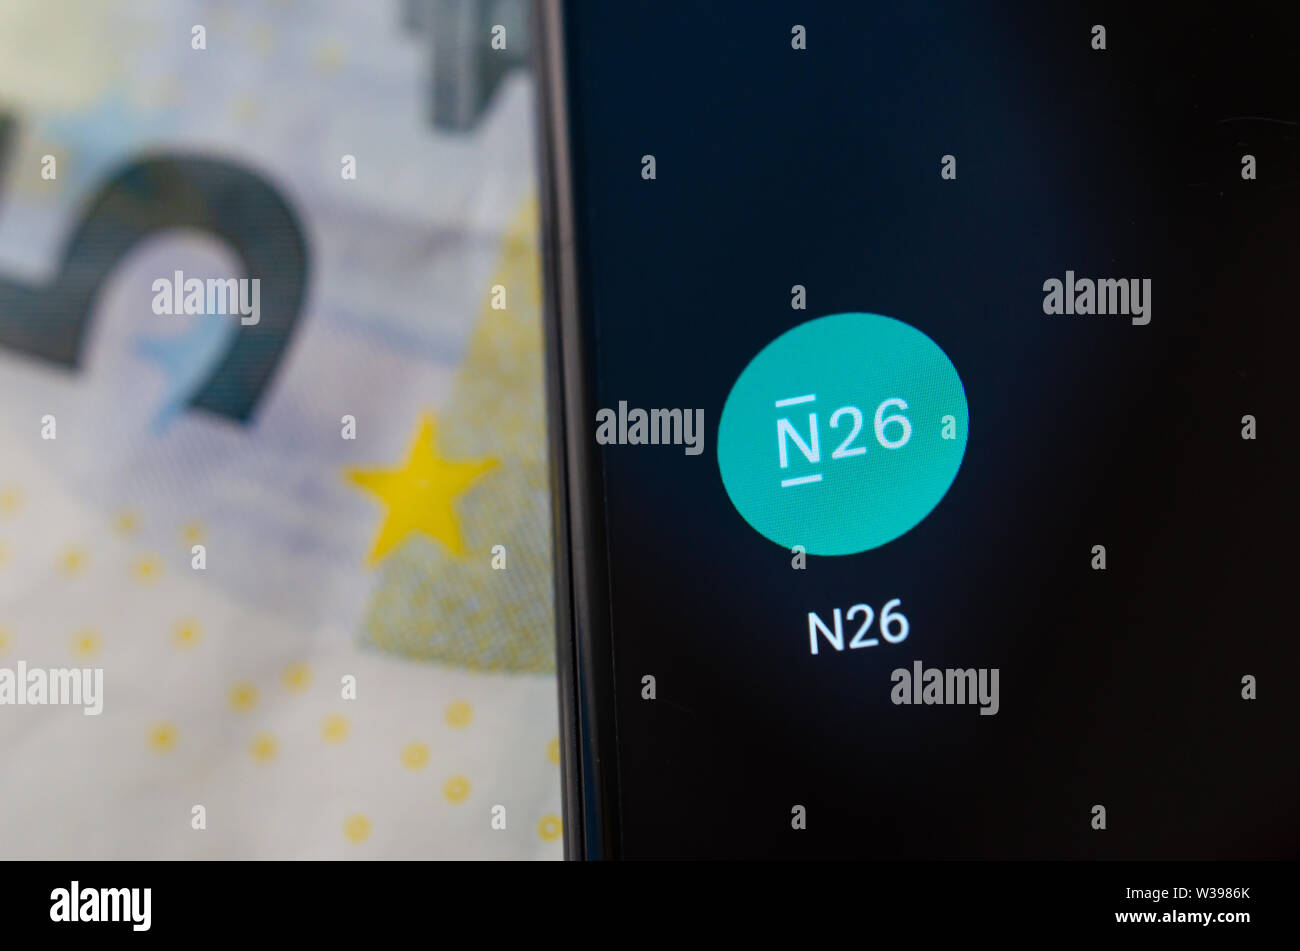 N26 Mobile Bank app on the smartphone screen in a main focus and the euro banknote at the blurred background. Stock Photo